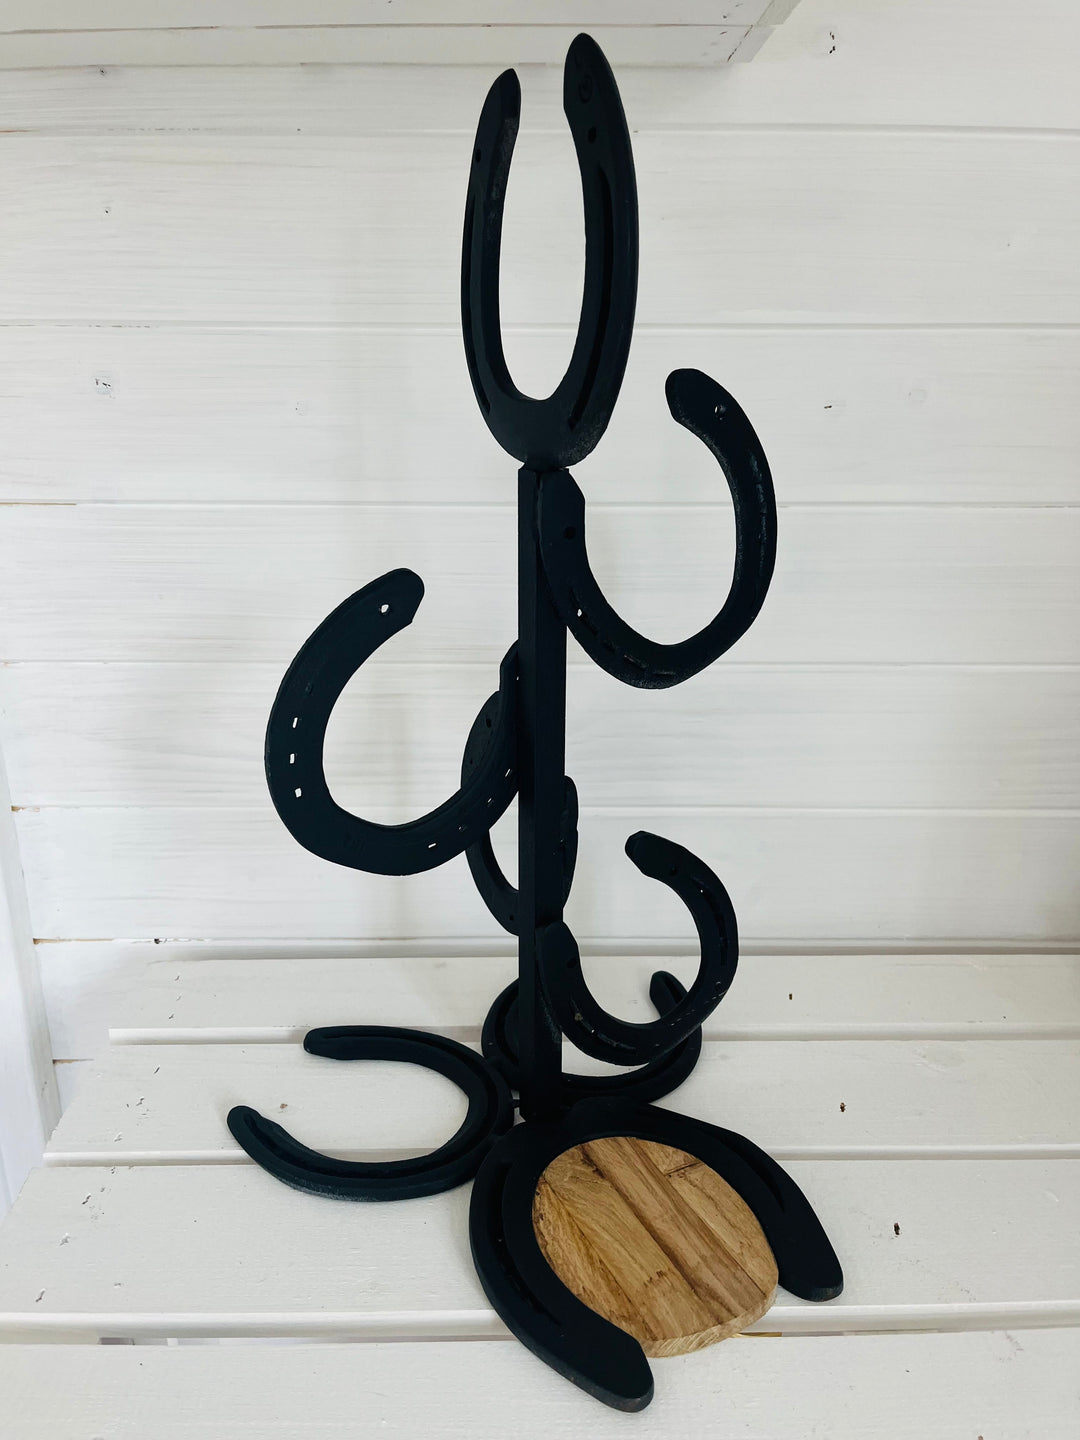 Unique whiskey stand made of horseshoes with a story